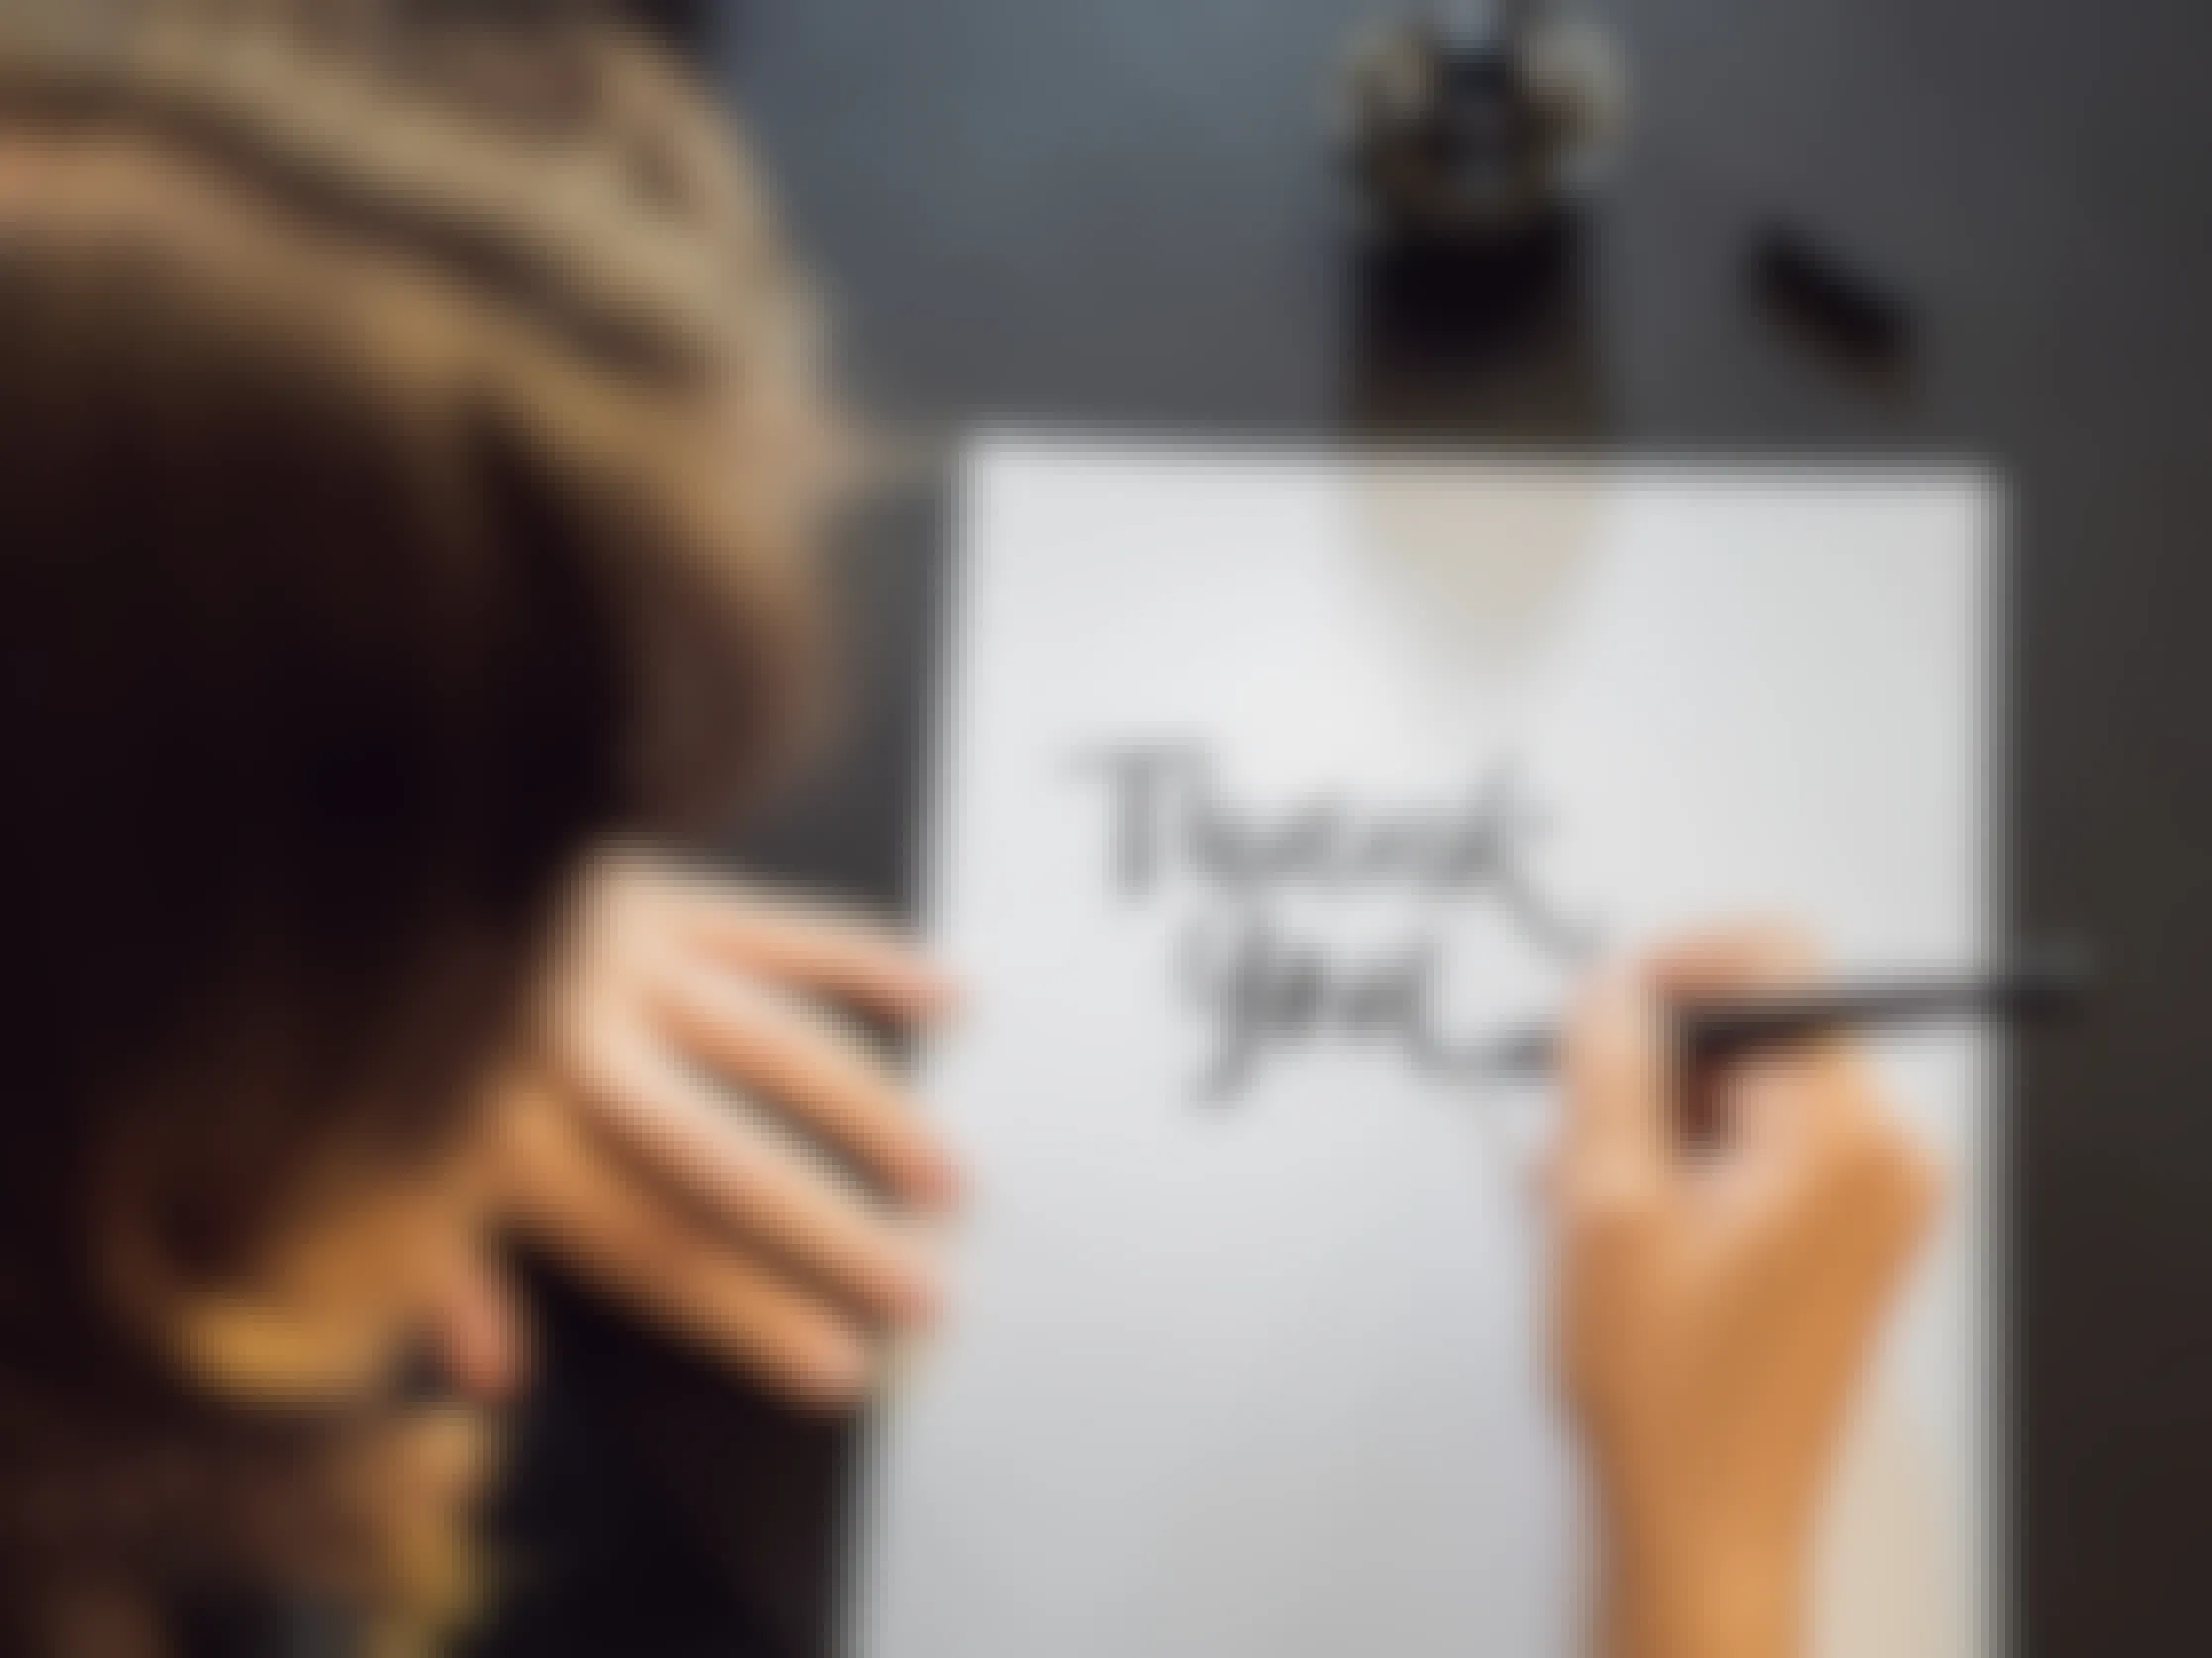 Someone writing "thank you" on a piece of paper in calligraphy